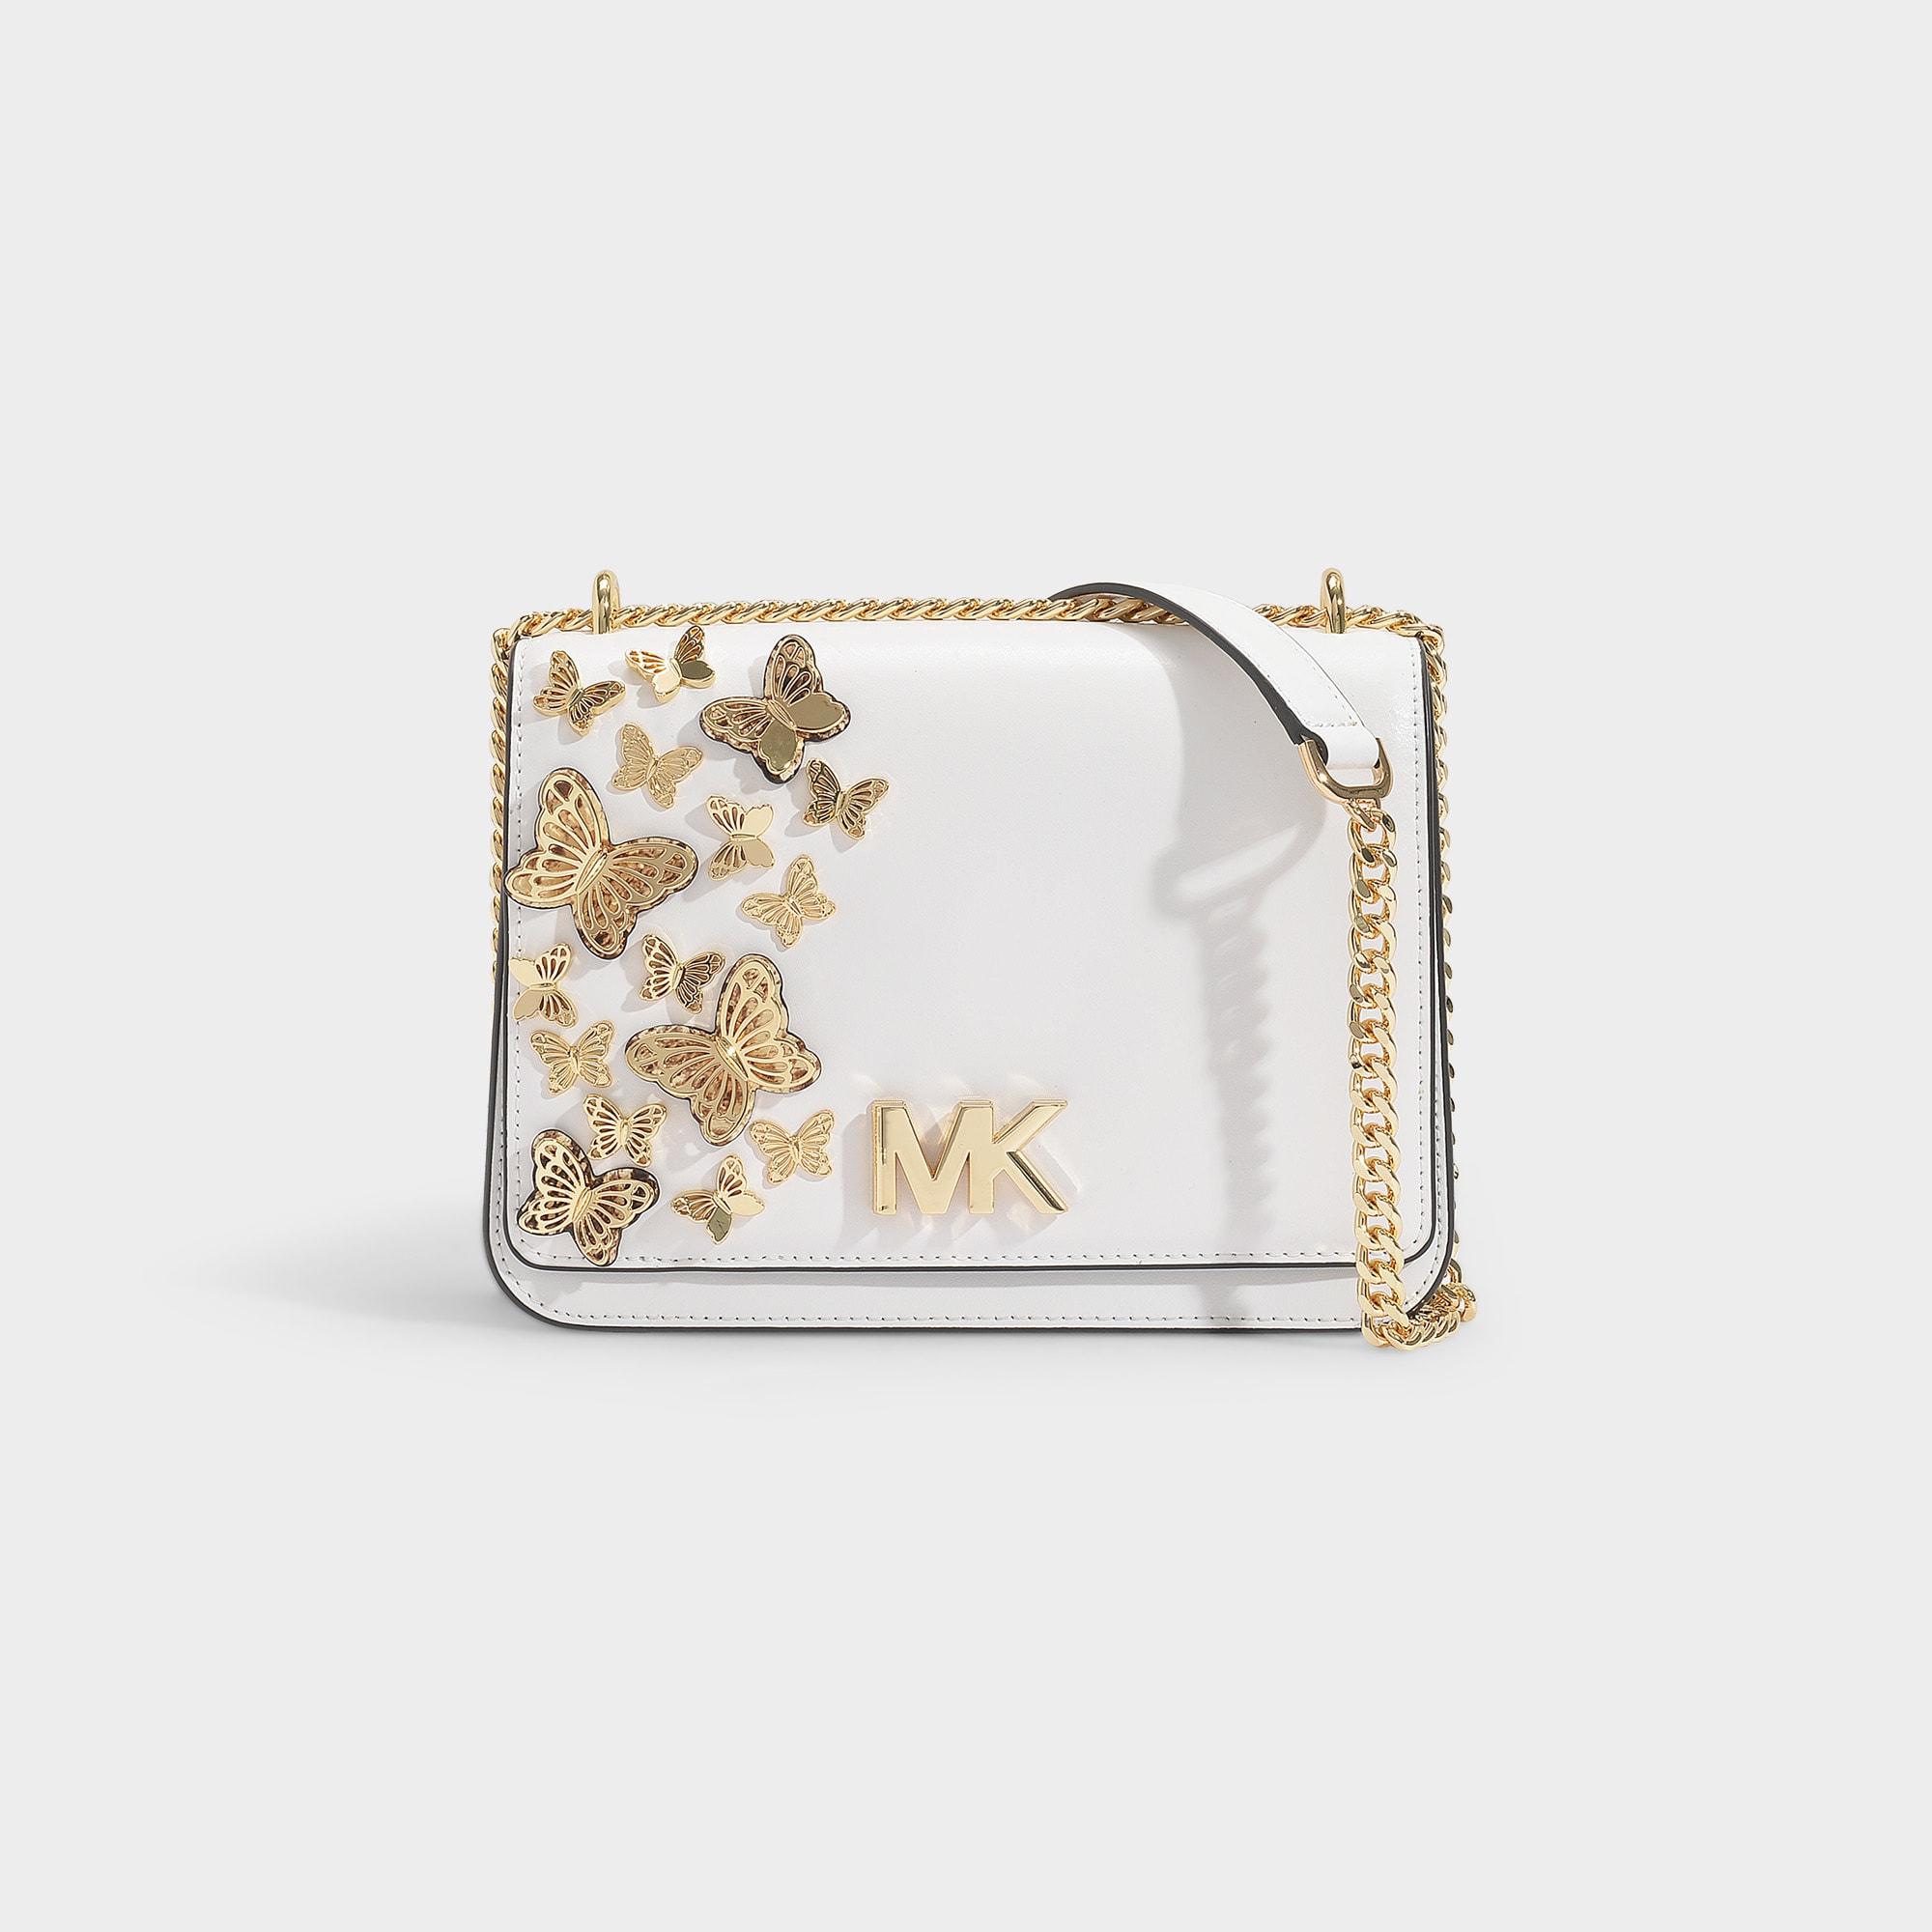 Michael Kors Butterfly Chain Leather Shoulder Bag in White | Lyst